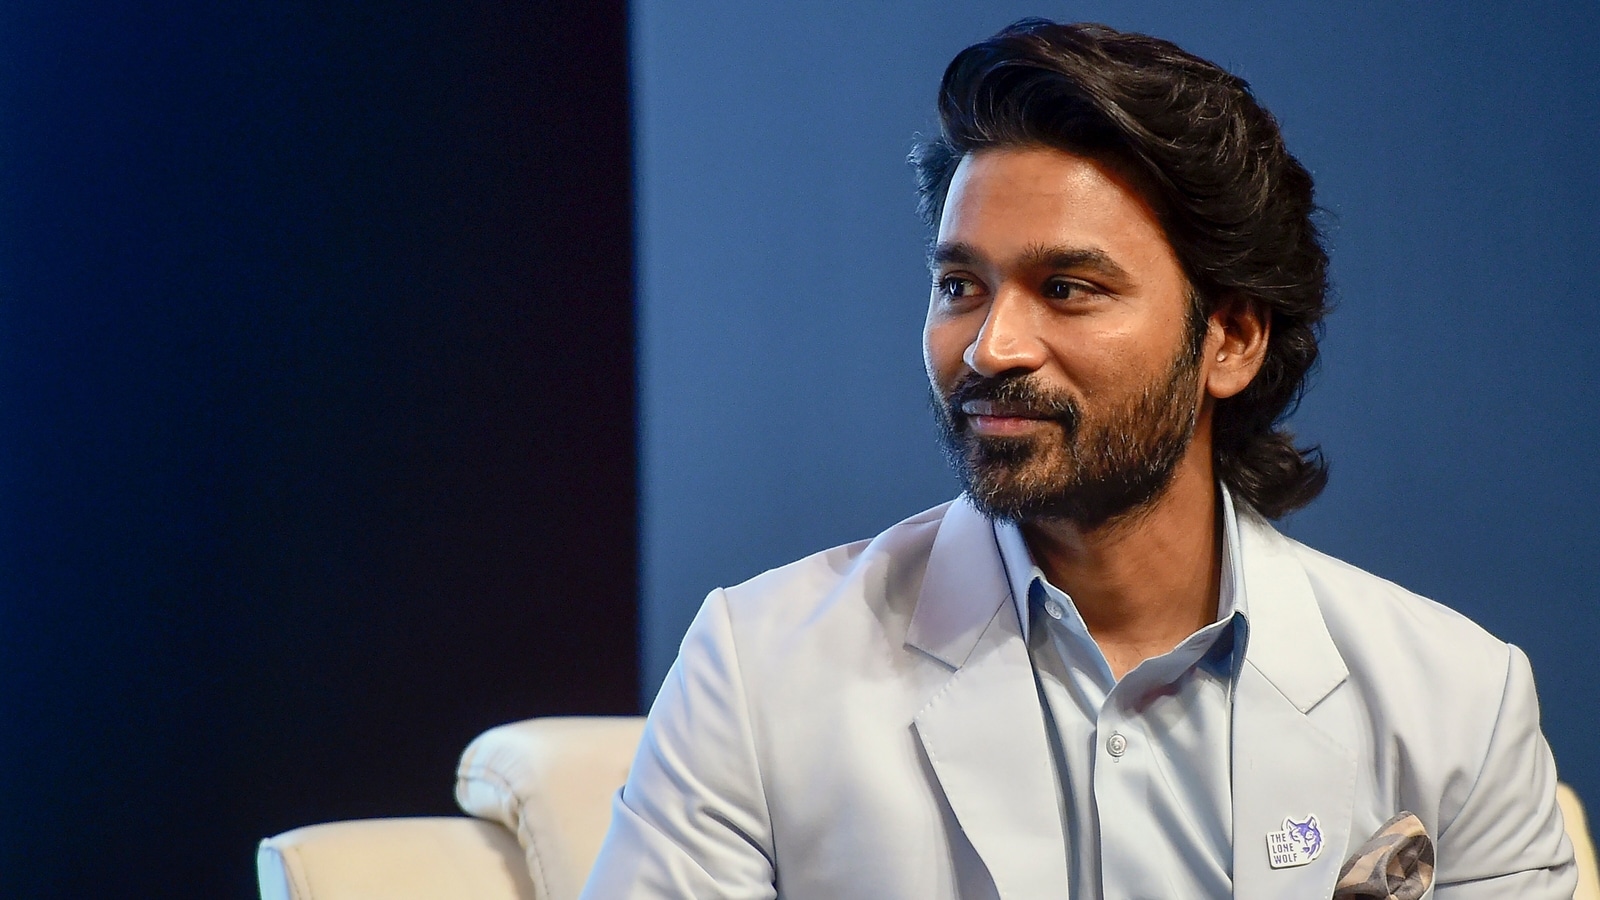 When Dhanush spoke about his love for cooking: 'I'd been a chef ...